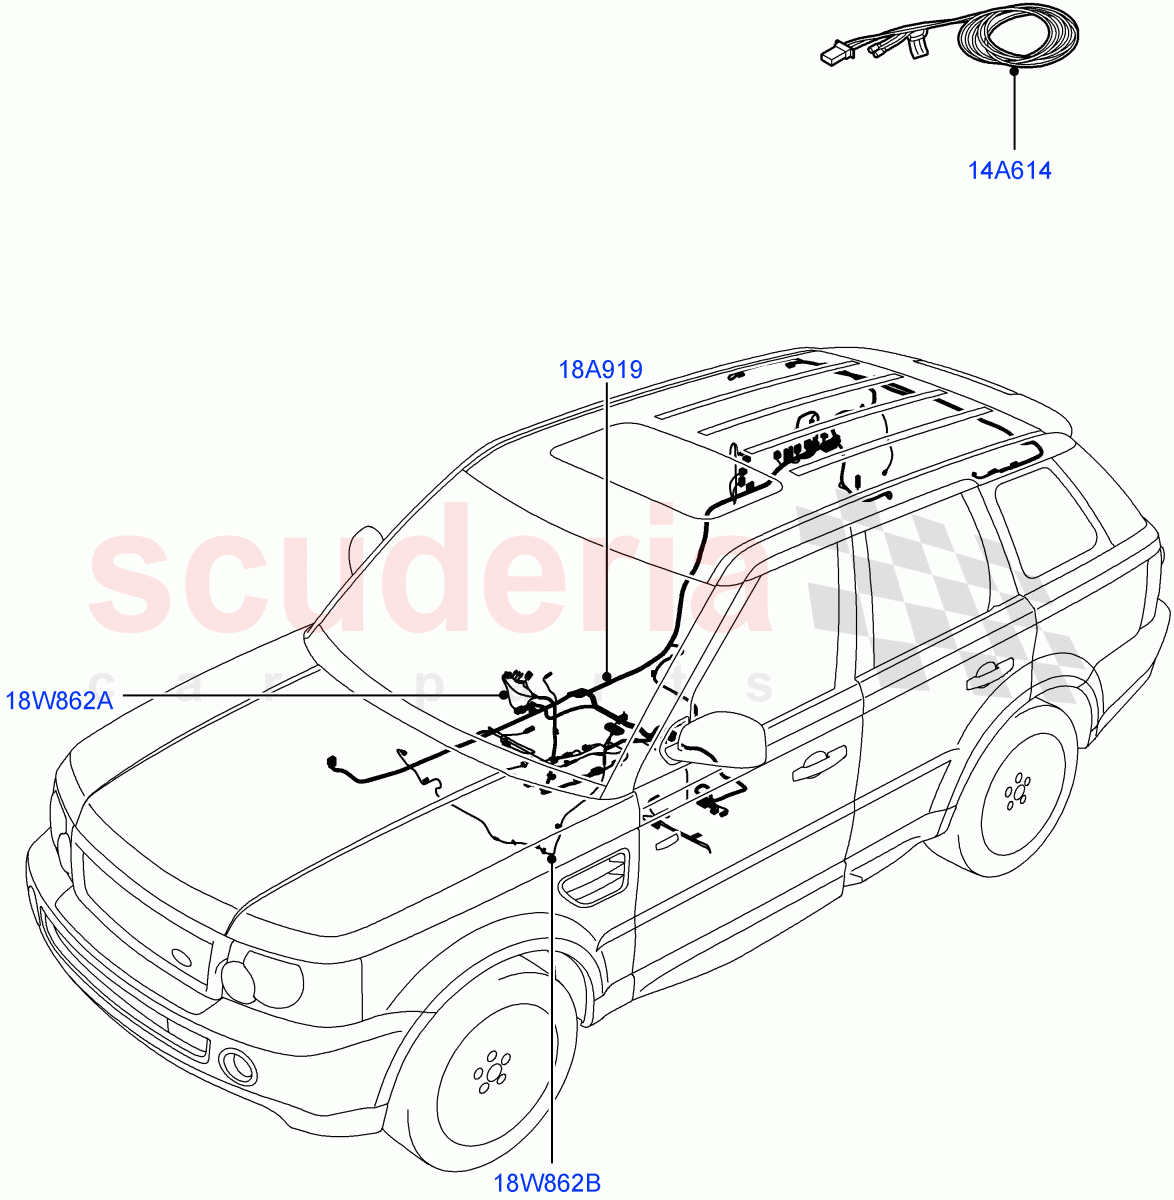 Electrical Wiring - Body And Rear(Audio/Navigation/Entertainment)((V)TO8A999999) of Land Rover Land Rover Range Rover Sport (2005-2009) [2.7 Diesel V6]